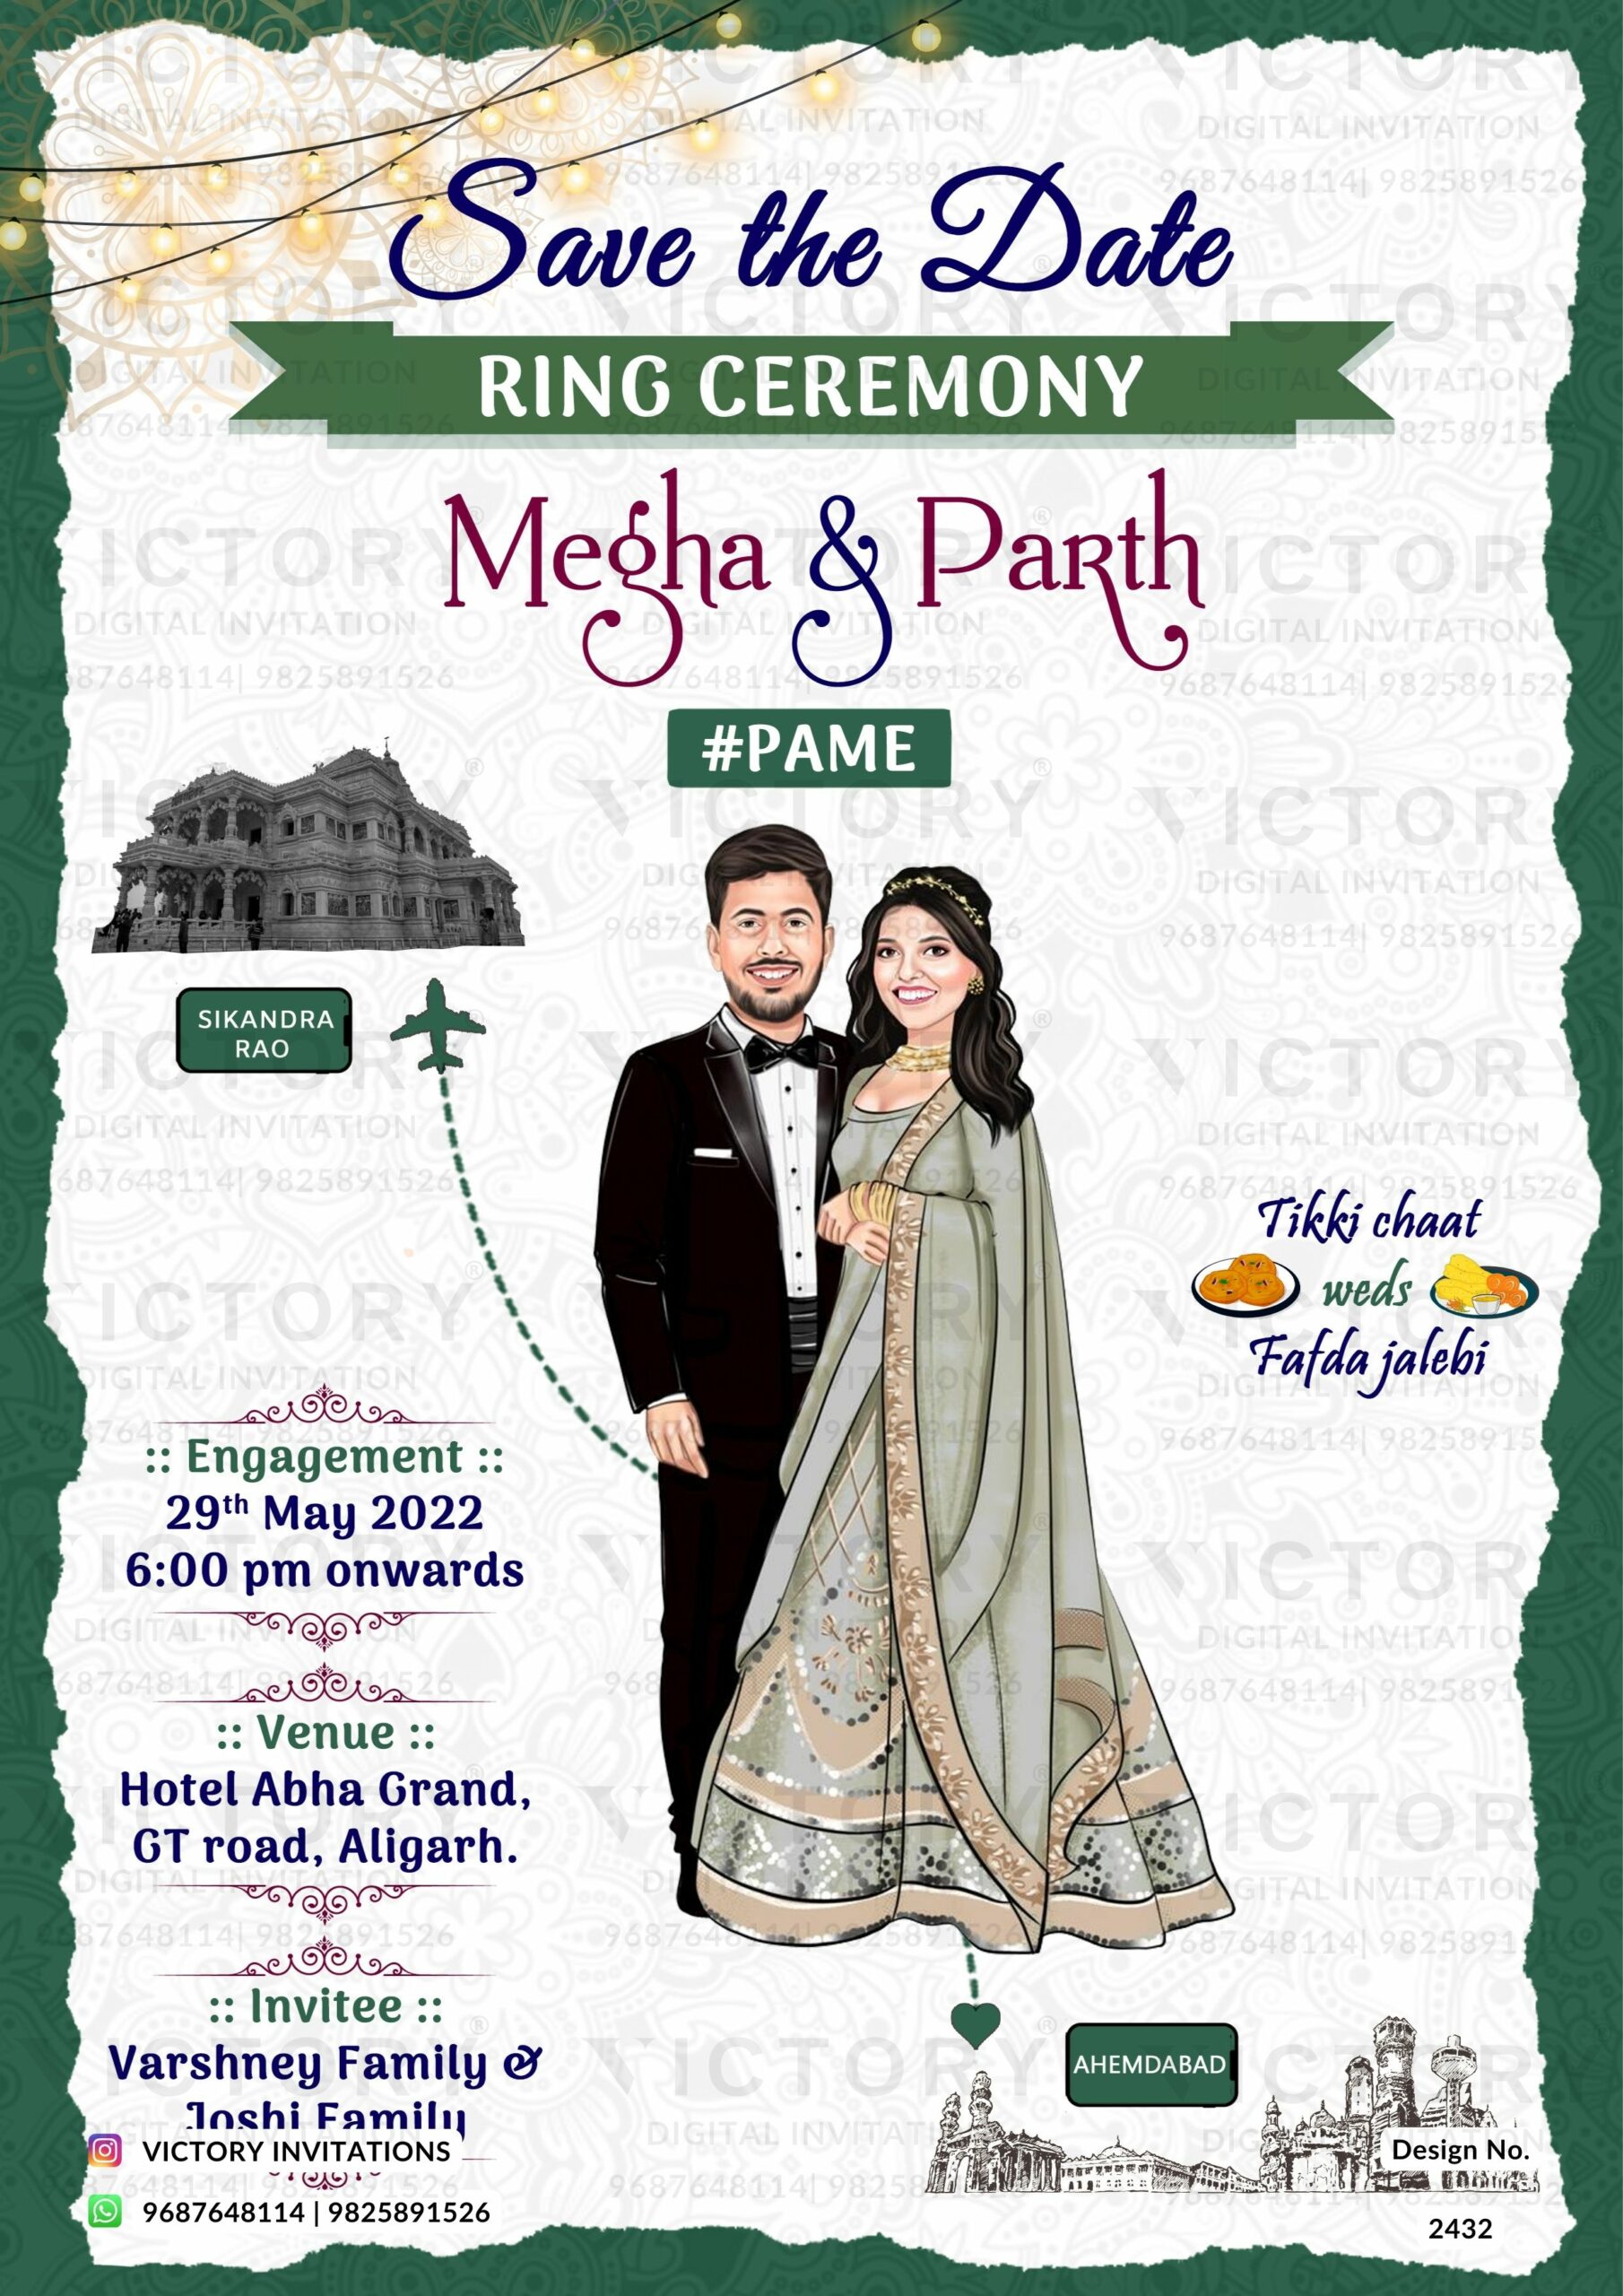 Nisha and Nithin 's Sangeet and RIng Ceremony by Invite Junction on Dribbble